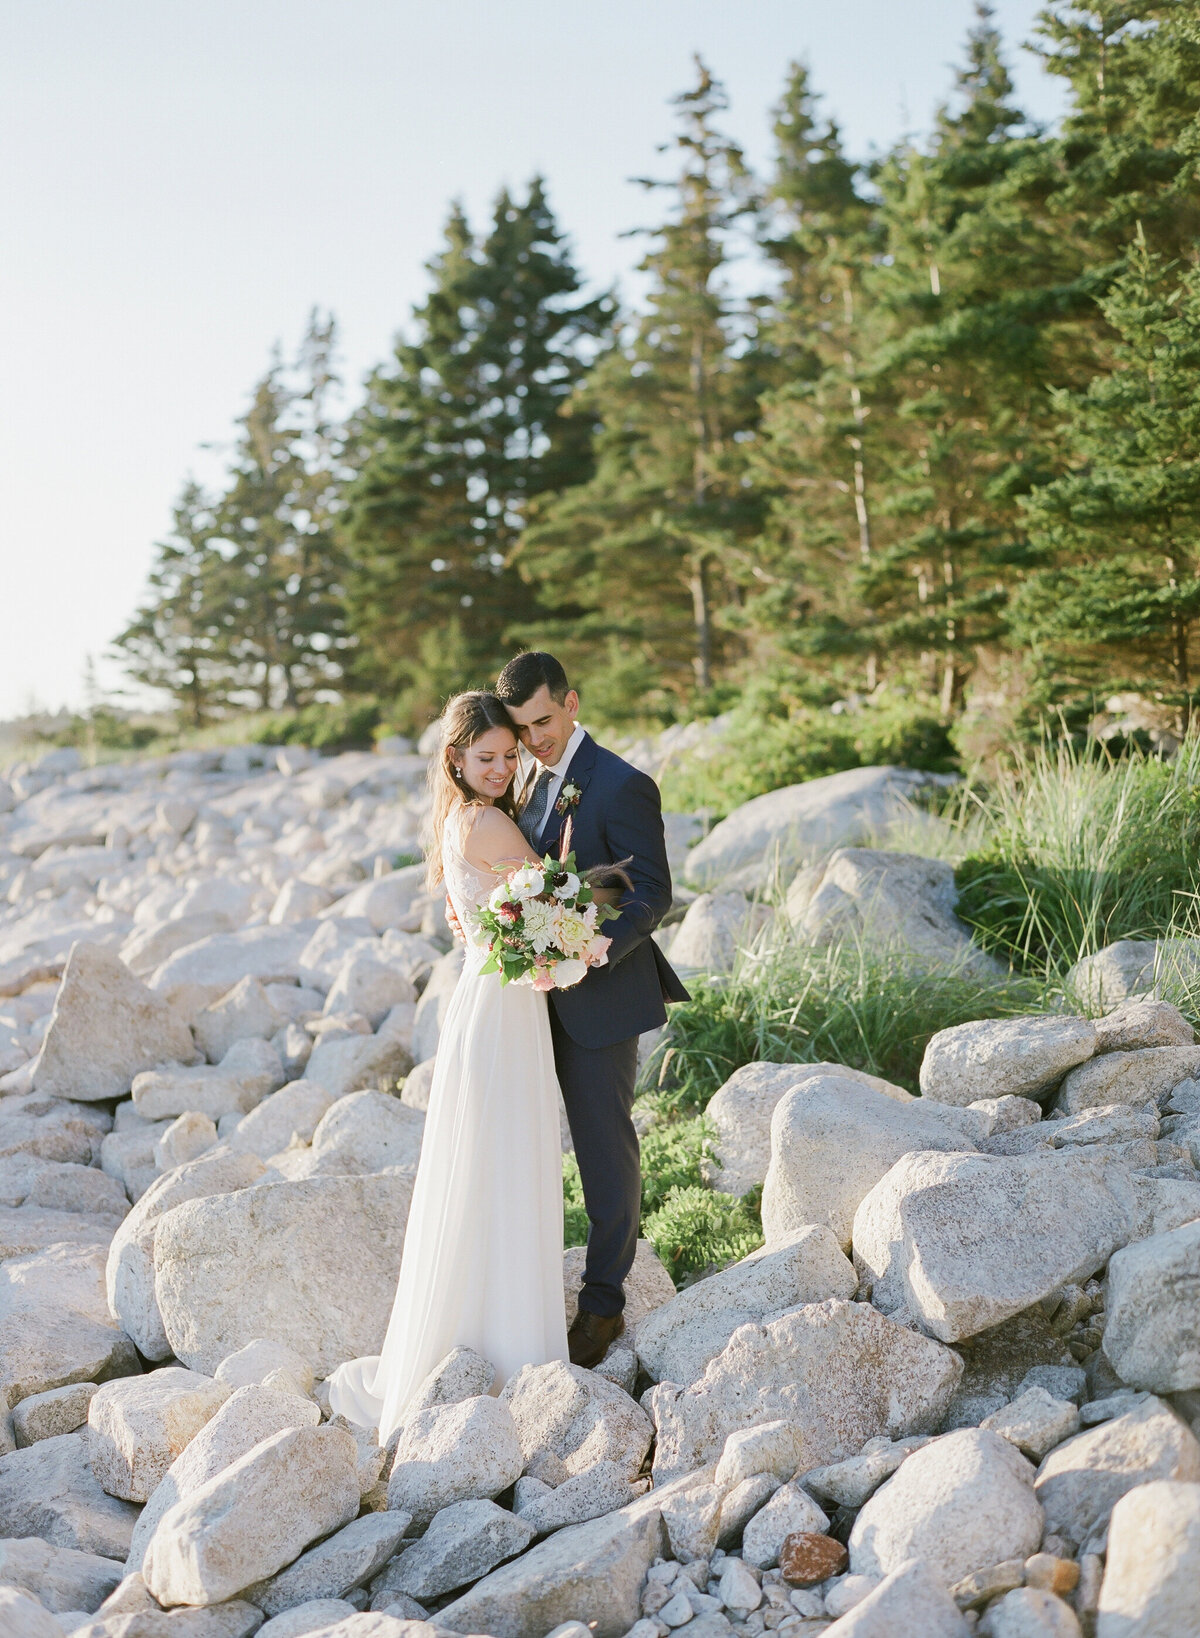 Jacqueline Anne Photography - Halifax Wedding Photographer - Jaclyn and Morgan-84